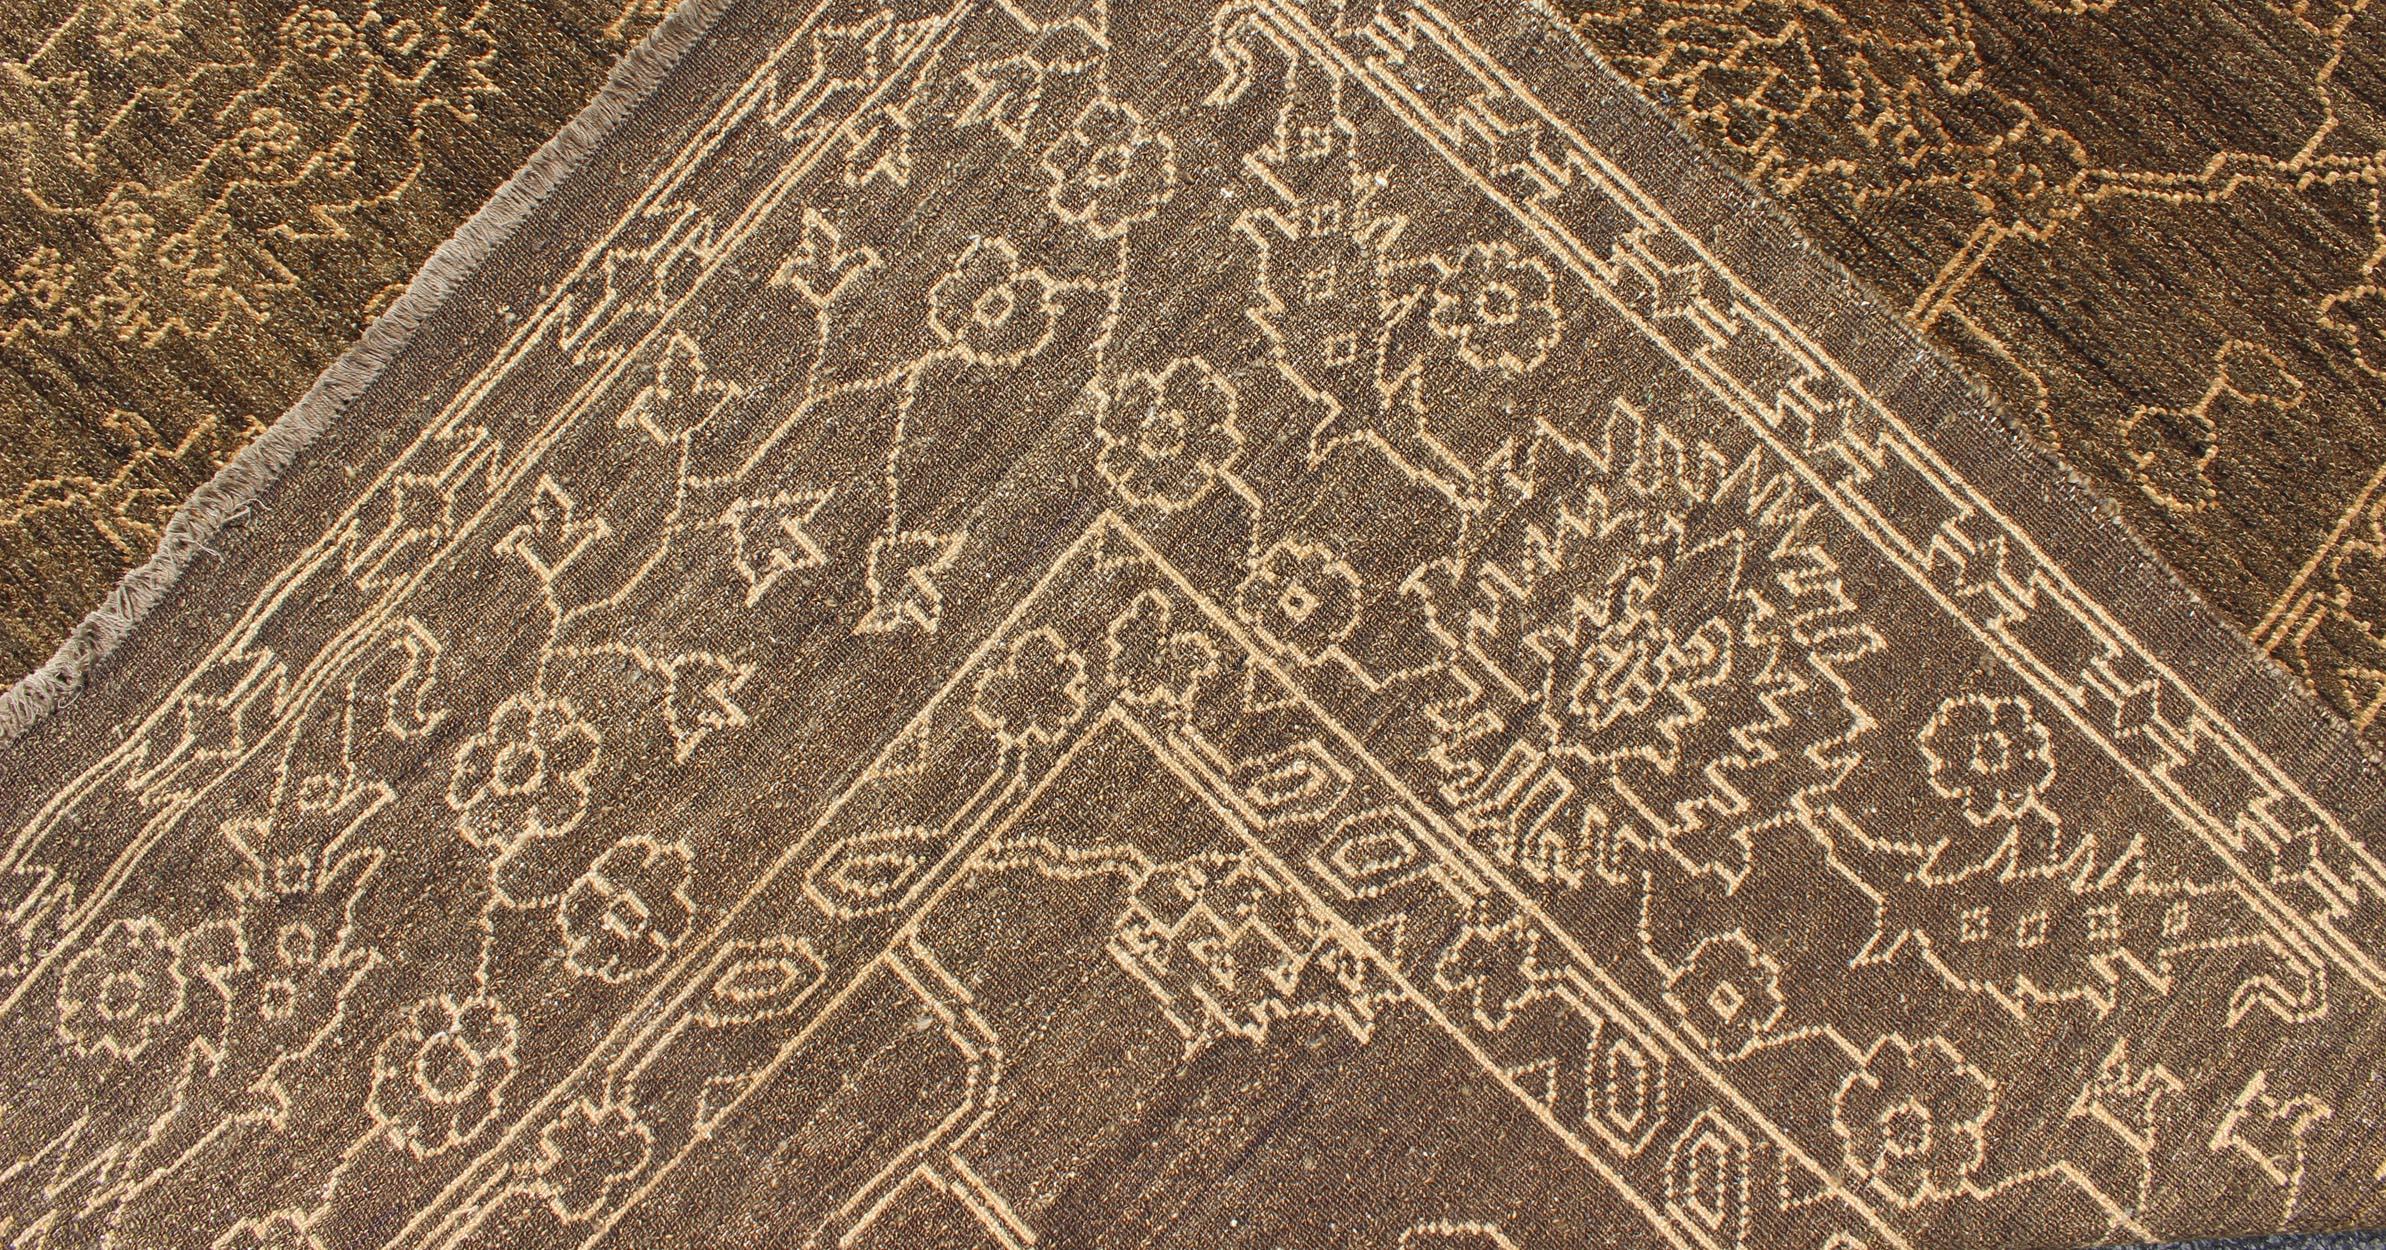 Wool Fine Transitional Rug with Stylized Geometric Motifs in Brown and Light Tan For Sale